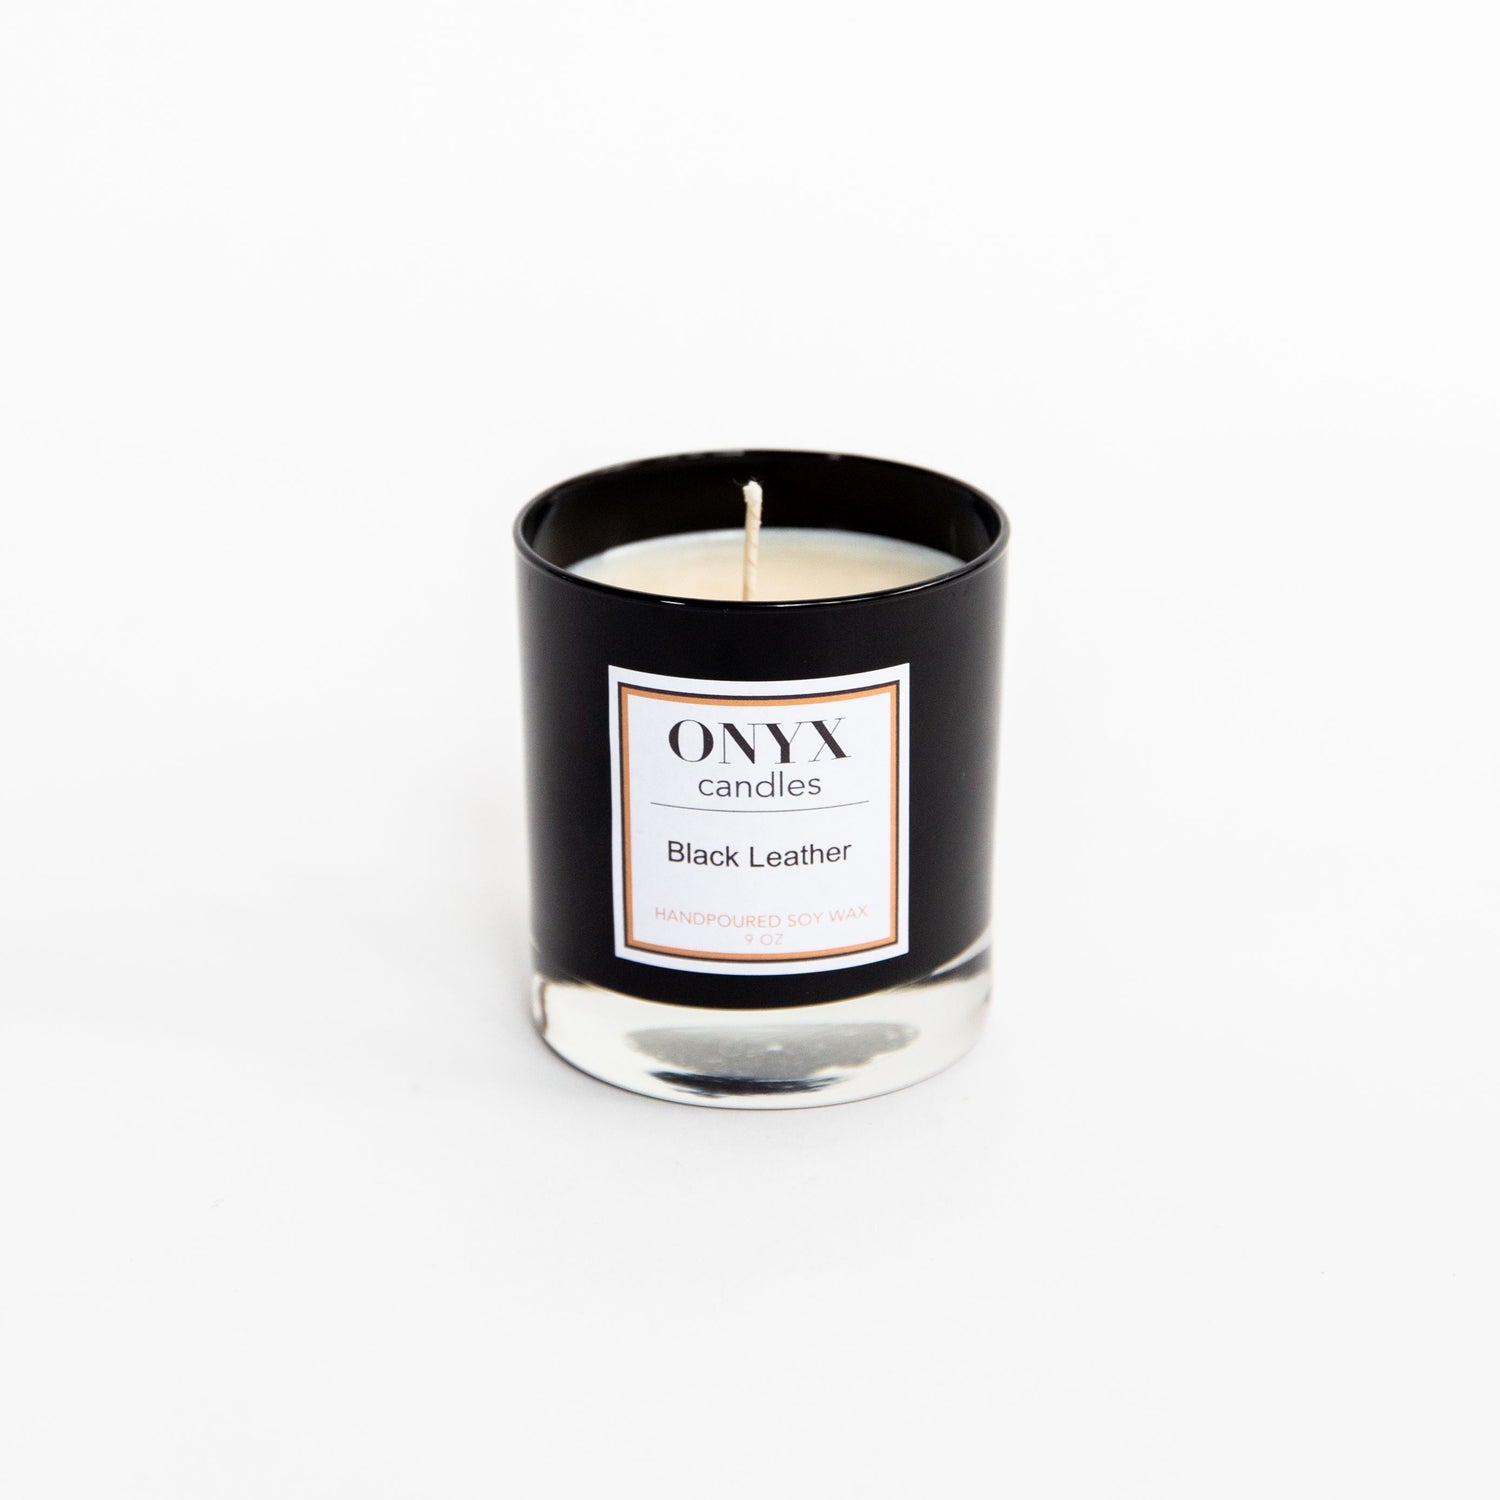 Pictured is the 9 oz black glass candle, in the scent Black Leather